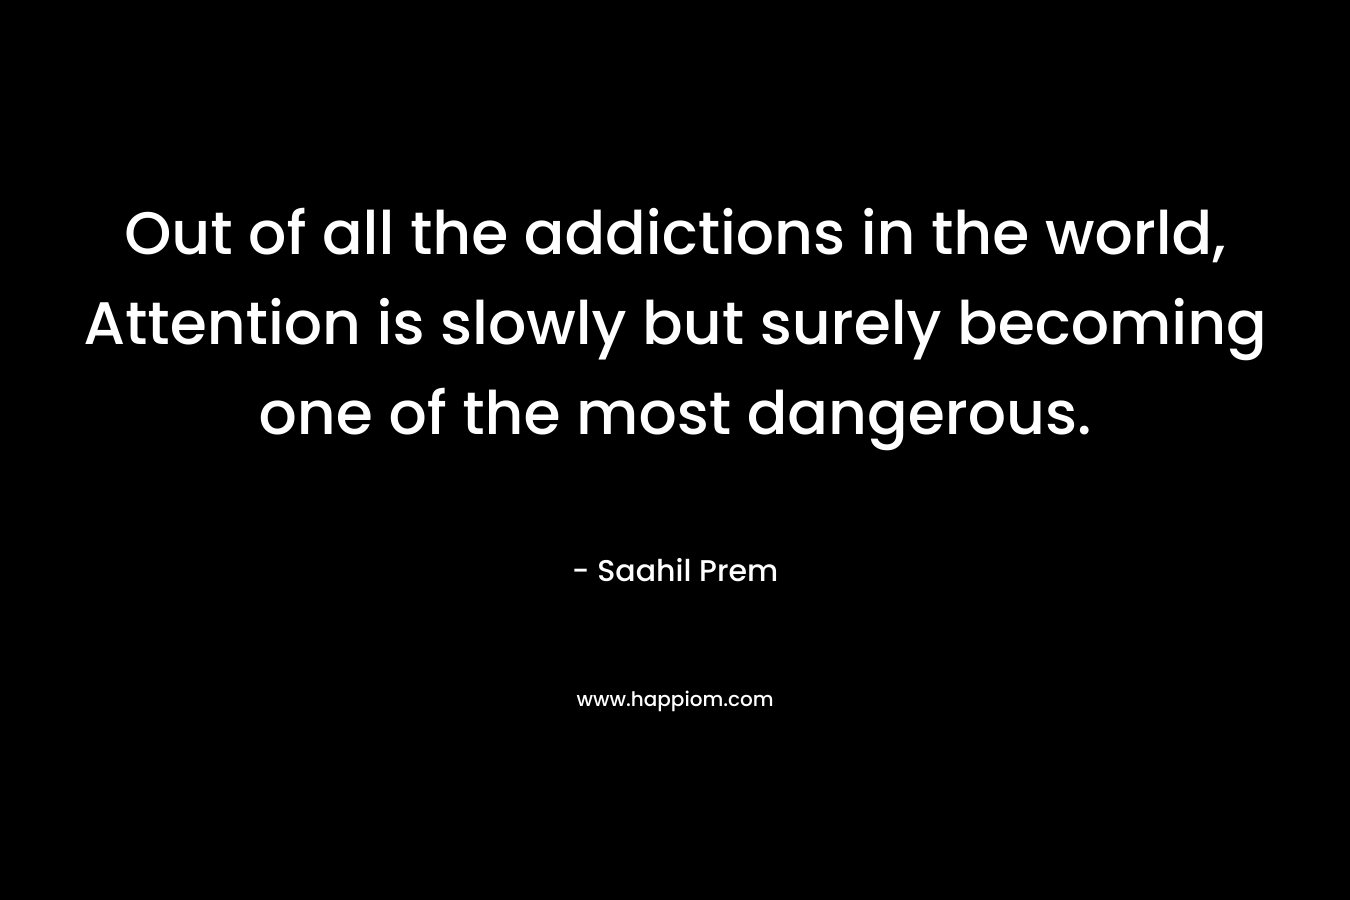 Out of all the addictions in the world, Attention is slowly but surely becoming one of the most dangerous. – Saahil Prem